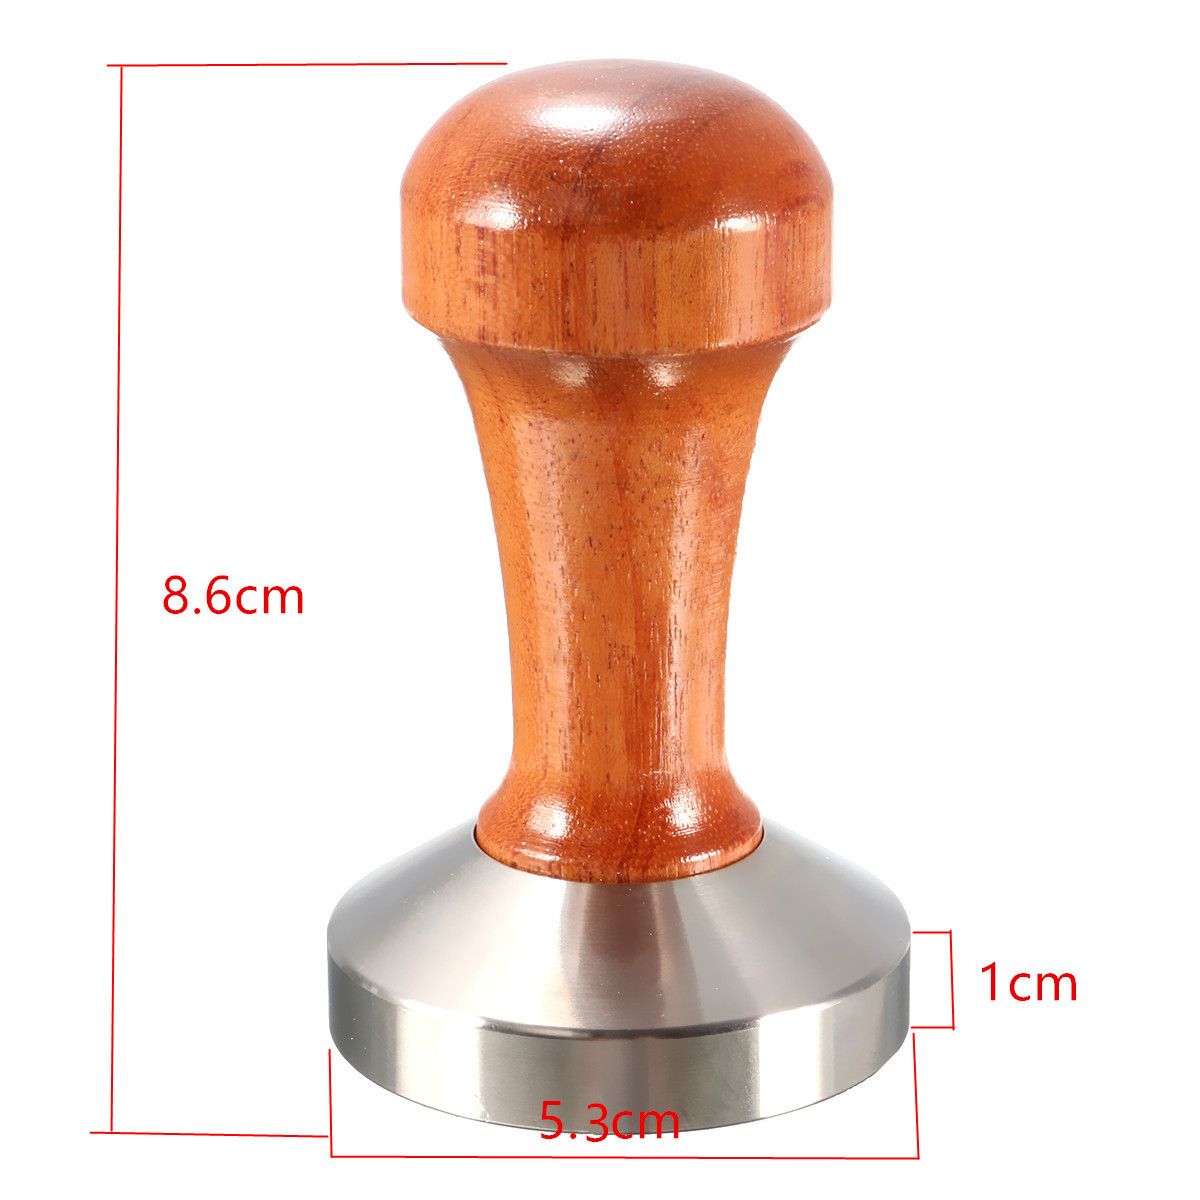 53mm-Stainless-Steel-Cafe-Coffee-Tamper-Bean-Press-for-Espresso-Flat-Base-Wooden-Handle-1170307